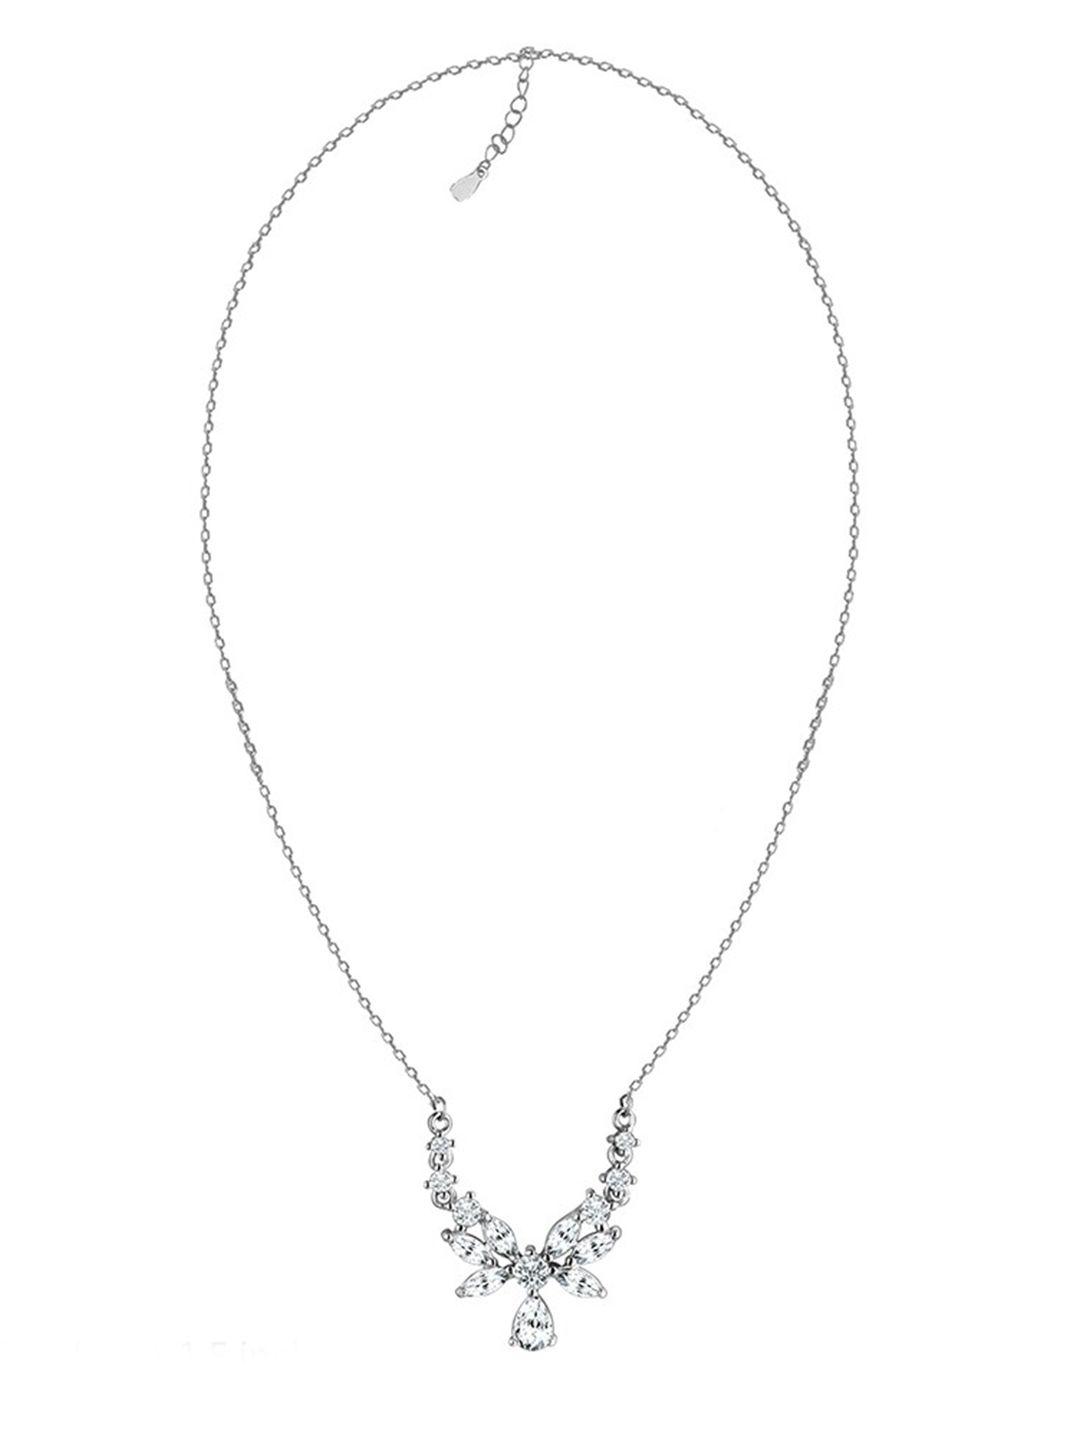 giva 925 sterling silver rhodium plated chrysalis necklace